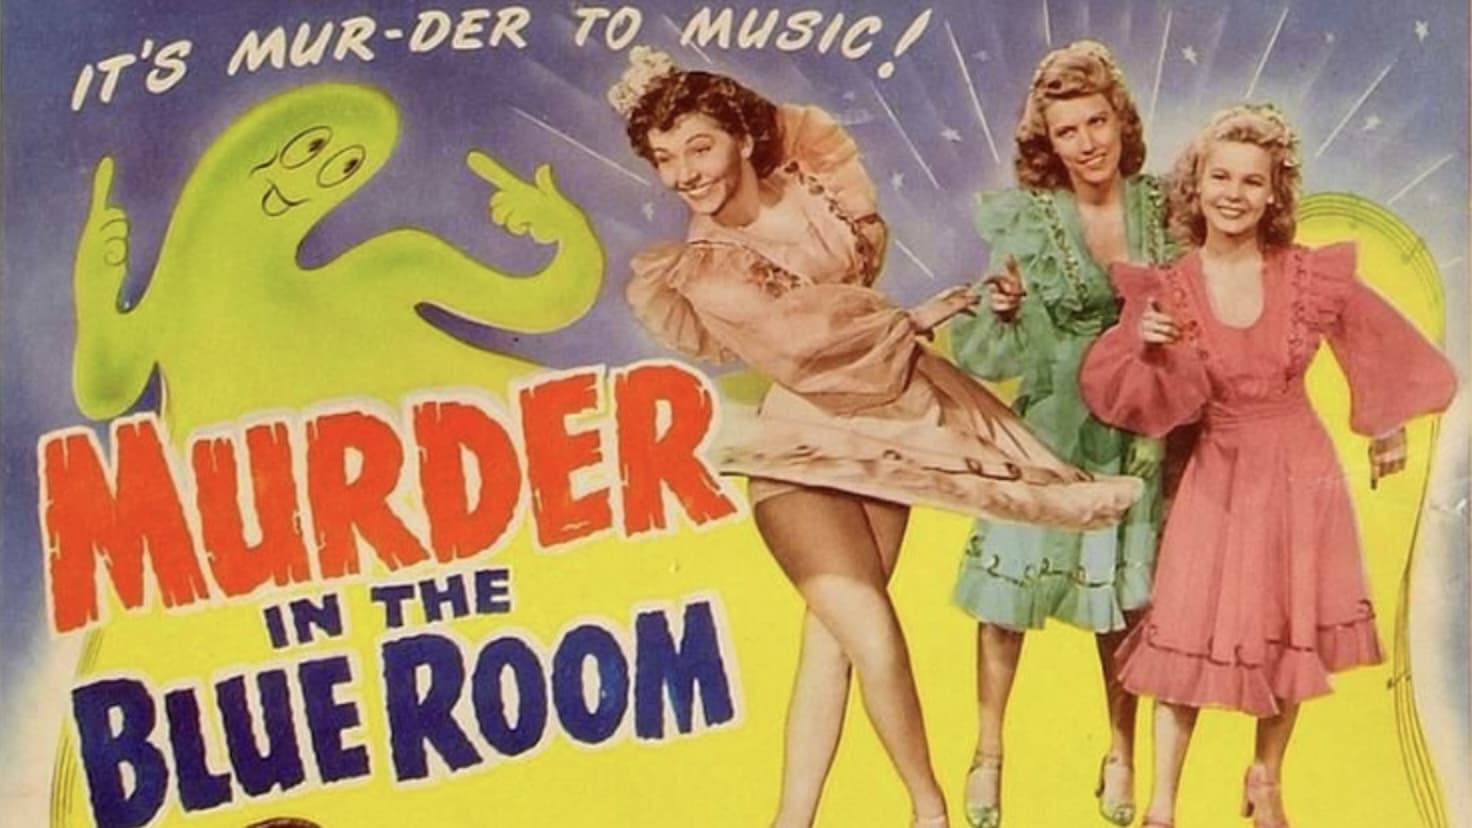 Murder in the Blue Room (1944)